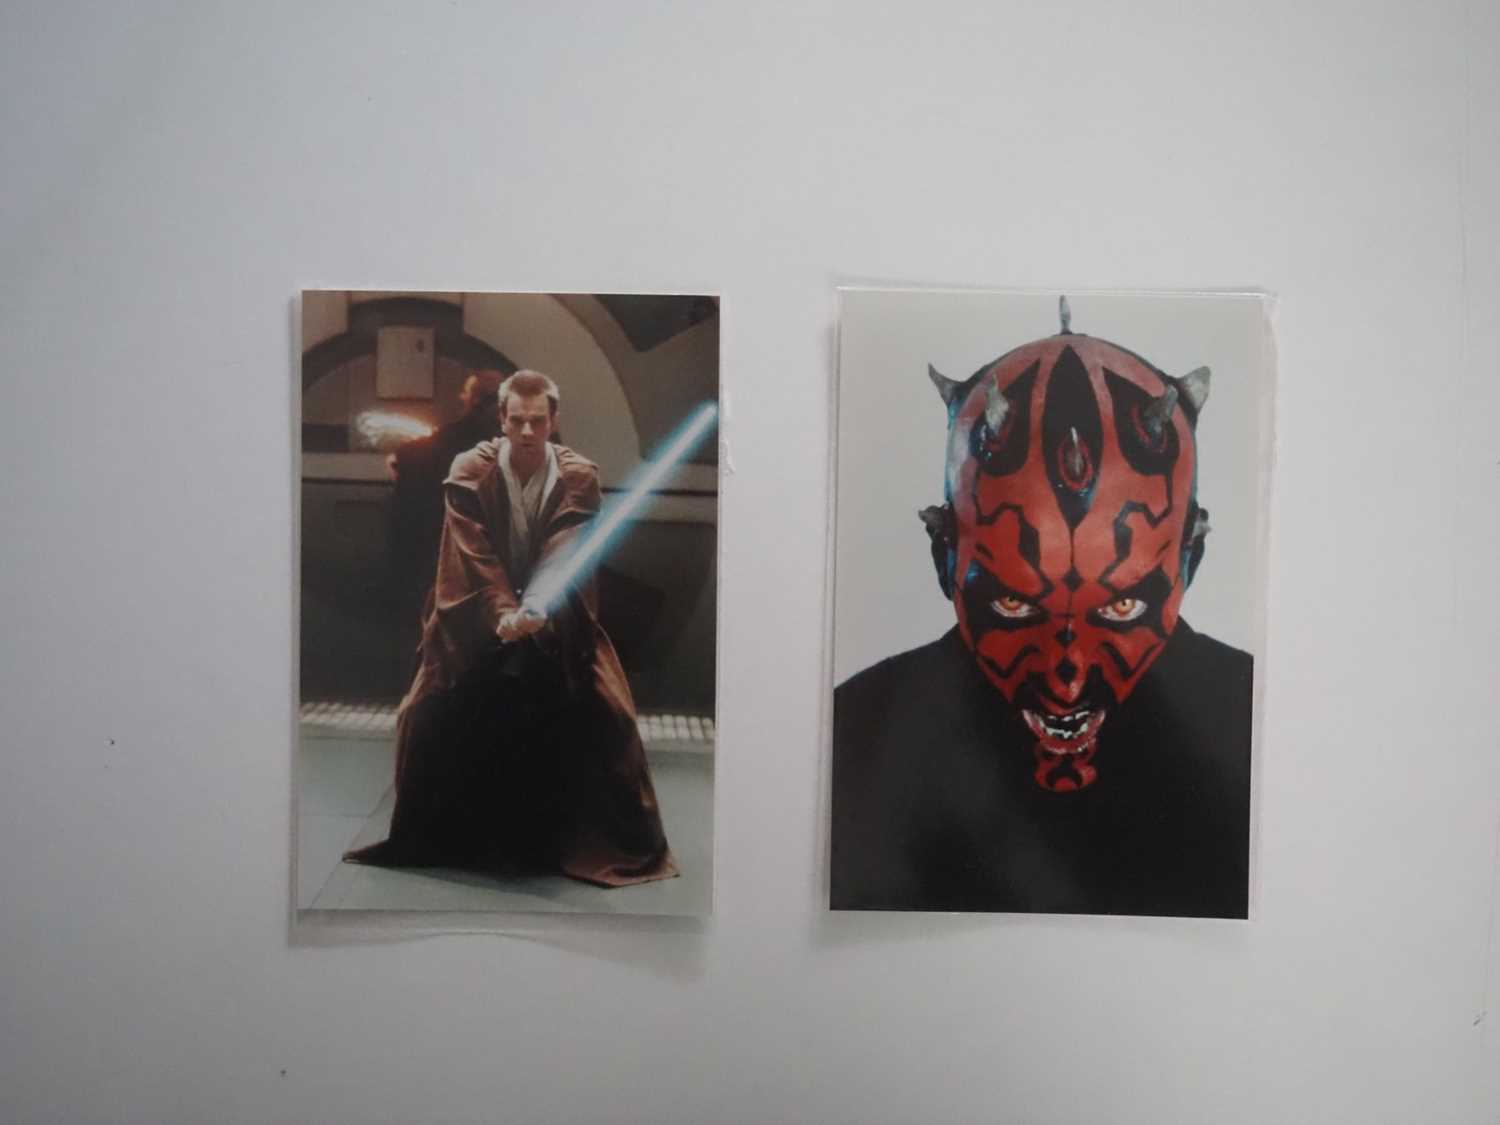 STAR WARS: A quantity of STAR WARS Episodes 1 and 2 memorabilia comprising a binder containing - Image 3 of 4